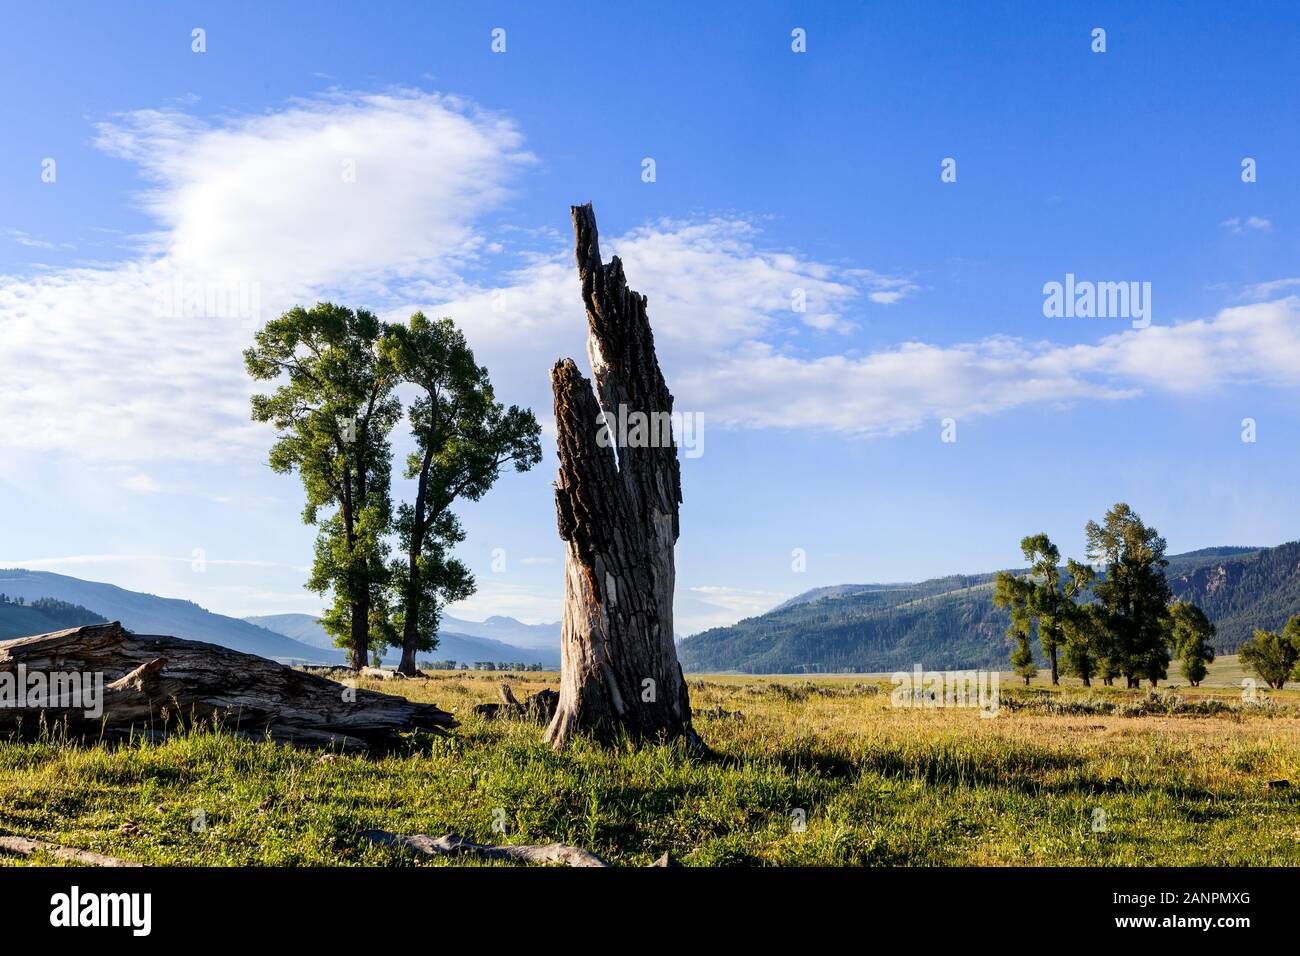 WY02029-00...WYOMING -  Cottonwood trees in the Lamar Valley of Yellowstone National Park. Stock Photo